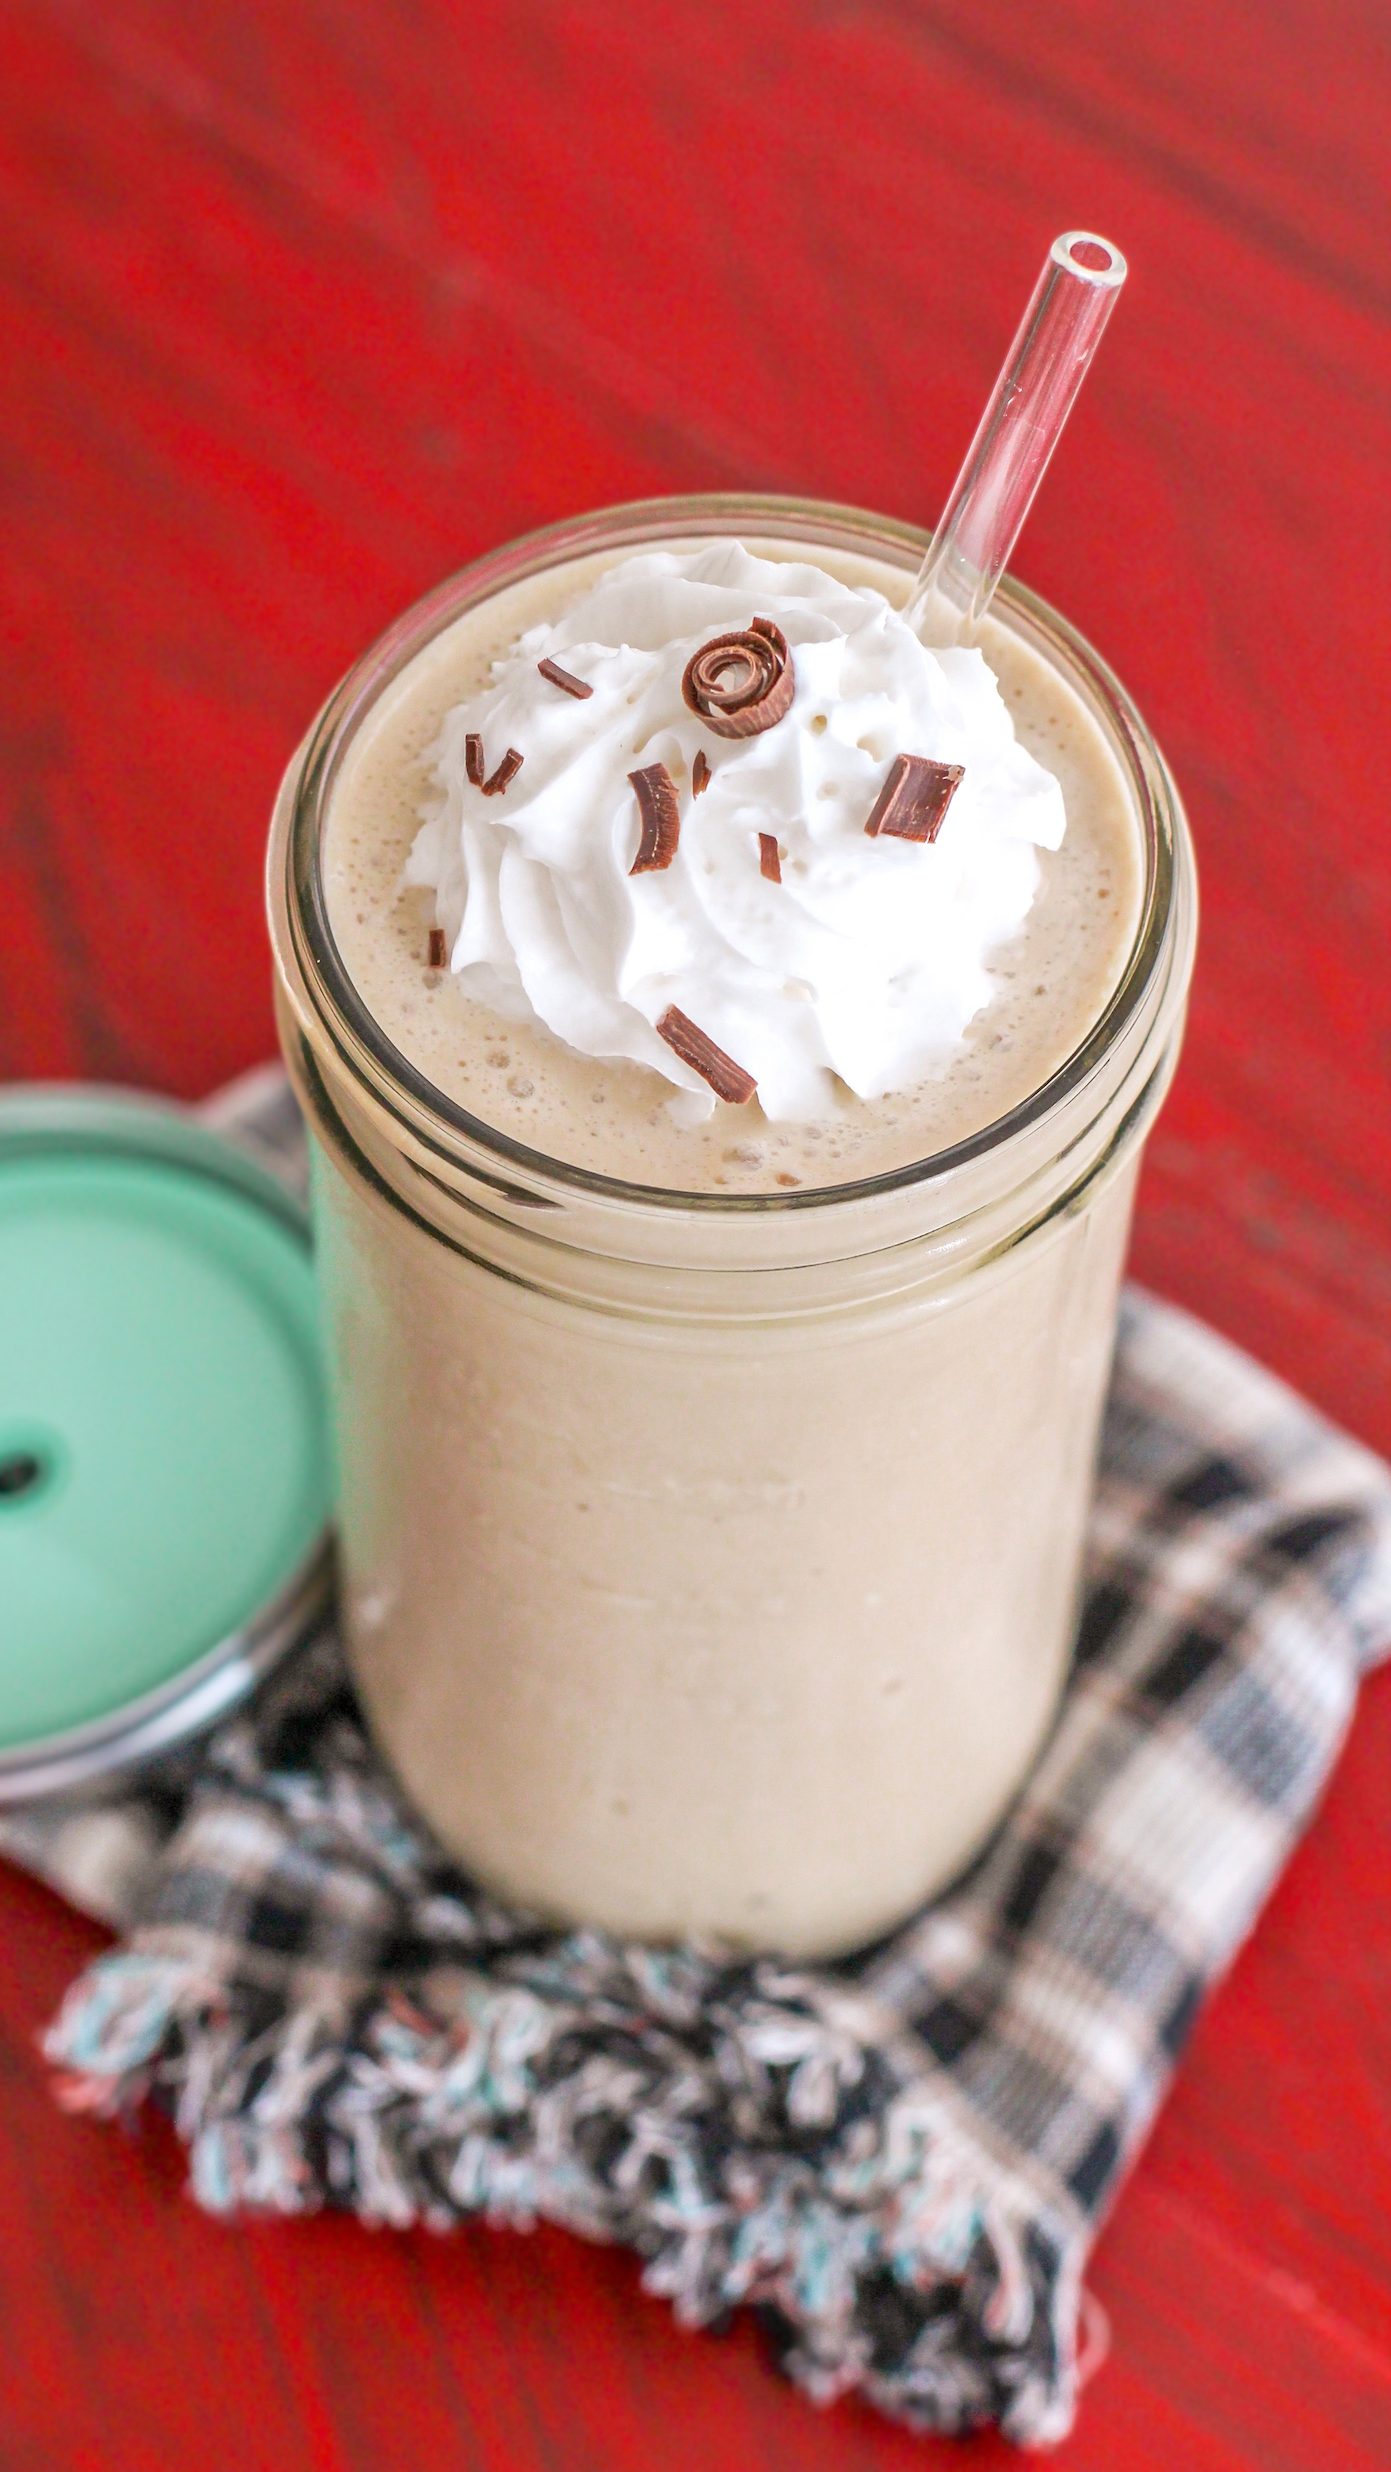 Healthy Iced Coffee Milkshake (sugar free, low carb, low fat, high protein) - Healthy Dessert Recipes at Desserts with Benefits